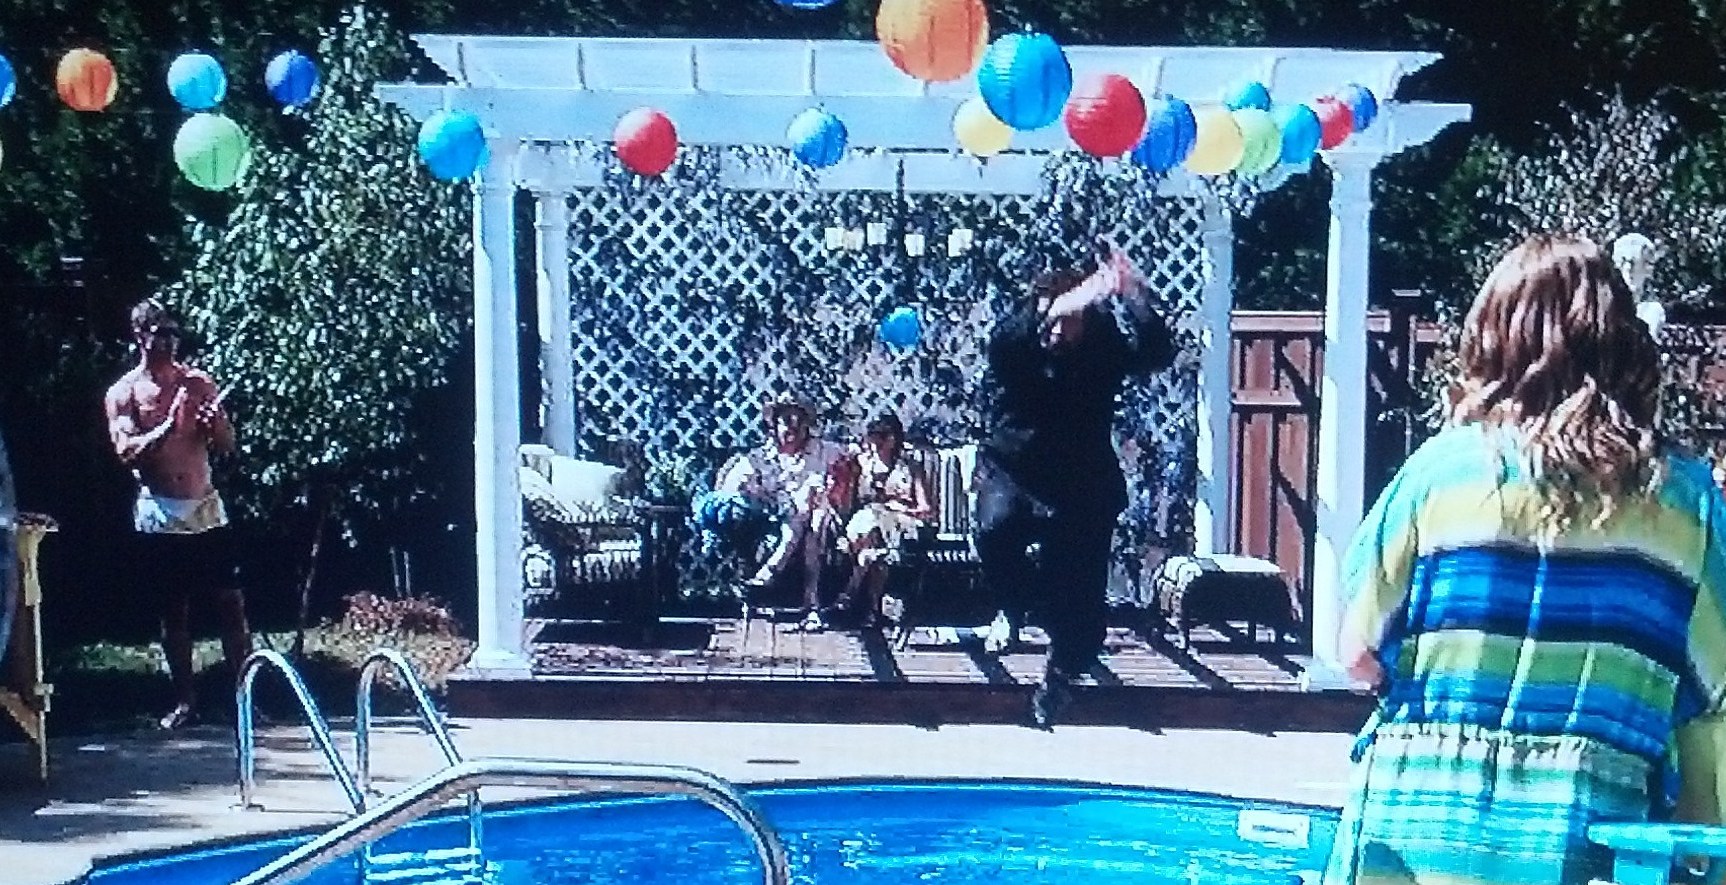 On the set of Eastbound and Down with Danny McBride jumping into the pool.